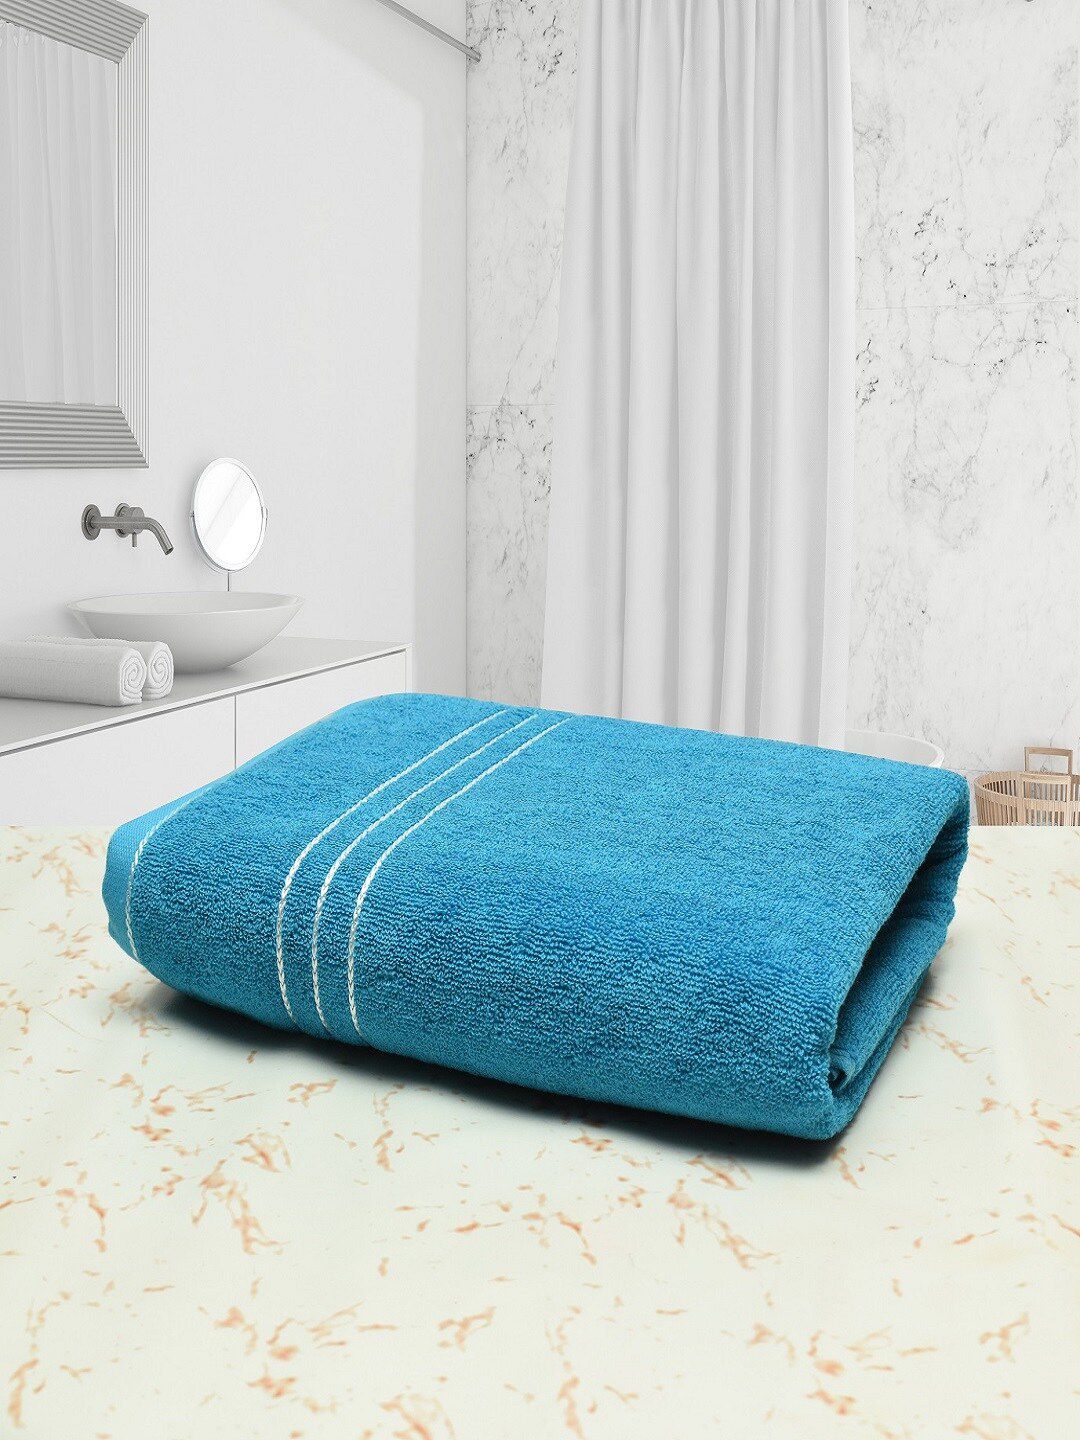 Cotton Bolls Textiles Blue & White Solid 400 GSM Cotton Bath Towel Price in India